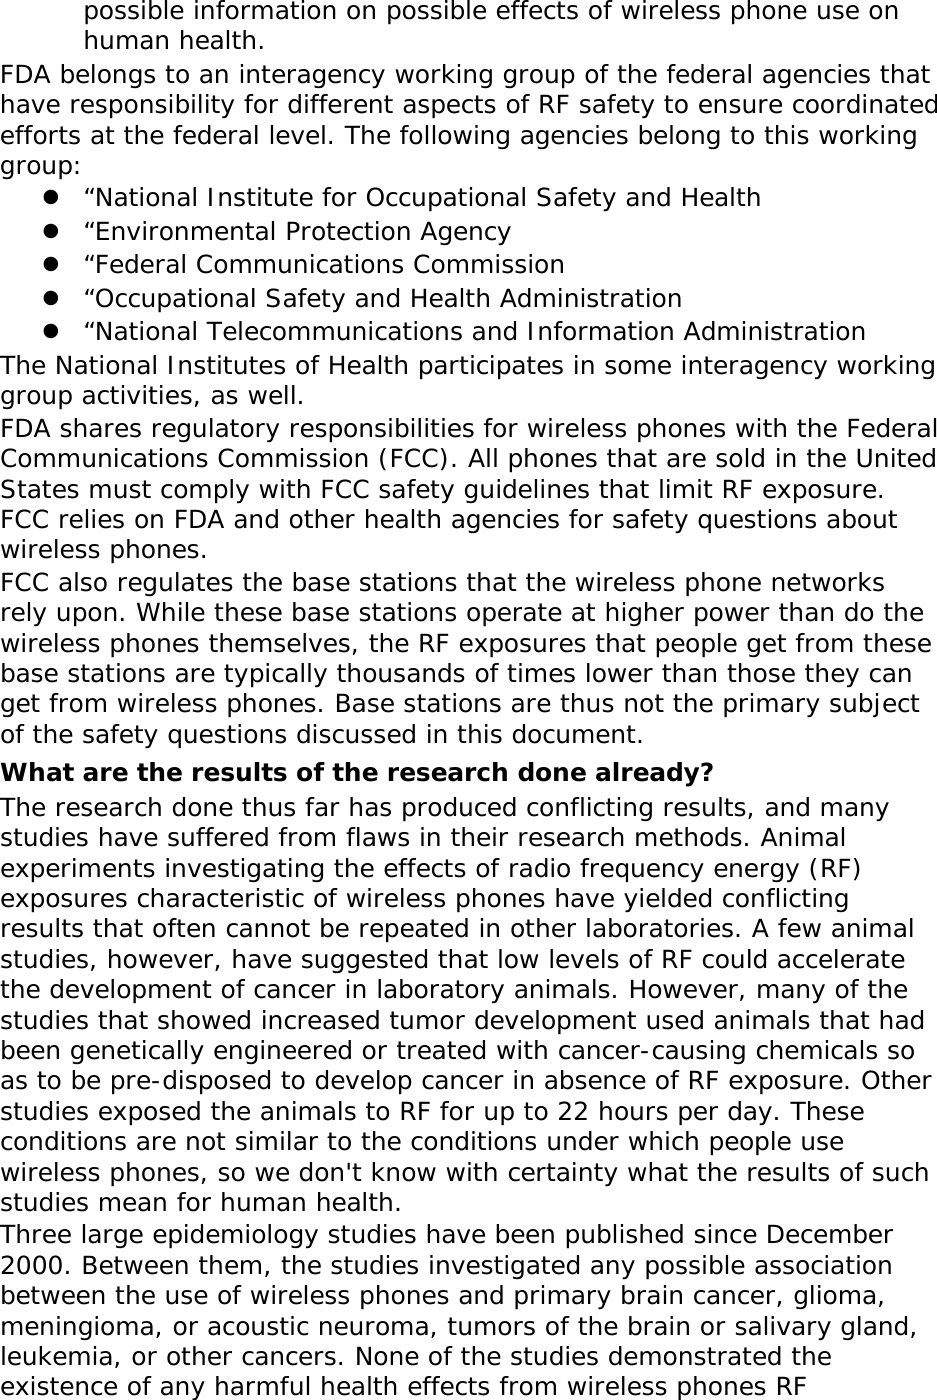 possible information on possible effects of wireless phone use on human health. FDA belongs to an interagency working group of the federal agencies that have responsibility for different aspects of RF safety to ensure coordinated efforts at the federal level. The following agencies belong to this working group:  “National Institute for Occupational Safety and Health  “Environmental Protection Agency  “Federal Communications Commission  “Occupational Safety and Health Administration  “National Telecommunications and Information Administration The National Institutes of Health participates in some interagency working group activities, as well. FDA shares regulatory responsibilities for wireless phones with the Federal Communications Commission (FCC). All phones that are sold in the United States must comply with FCC safety guidelines that limit RF exposure. FCC relies on FDA and other health agencies for safety questions about wireless phones. FCC also regulates the base stations that the wireless phone networks rely upon. While these base stations operate at higher power than do the wireless phones themselves, the RF exposures that people get from these base stations are typically thousands of times lower than those they can get from wireless phones. Base stations are thus not the primary subject of the safety questions discussed in this document. What are the results of the research done already? The research done thus far has produced conflicting results, and many studies have suffered from flaws in their research methods. Animal experiments investigating the effects of radio frequency energy (RF) exposures characteristic of wireless phones have yielded conflicting results that often cannot be repeated in other laboratories. A few animal studies, however, have suggested that low levels of RF could accelerate the development of cancer in laboratory animals. However, many of the studies that showed increased tumor development used animals that had been genetically engineered or treated with cancer-causing chemicals so as to be pre-disposed to develop cancer in absence of RF exposure. Other studies exposed the animals to RF for up to 22 hours per day. These conditions are not similar to the conditions under which people use wireless phones, so we don&apos;t know with certainty what the results of such studies mean for human health. Three large epidemiology studies have been published since December 2000. Between them, the studies investigated any possible association between the use of wireless phones and primary brain cancer, glioma, meningioma, or acoustic neuroma, tumors of the brain or salivary gland, leukemia, or other cancers. None of the studies demonstrated the existence of any harmful health effects from wireless phones RF 